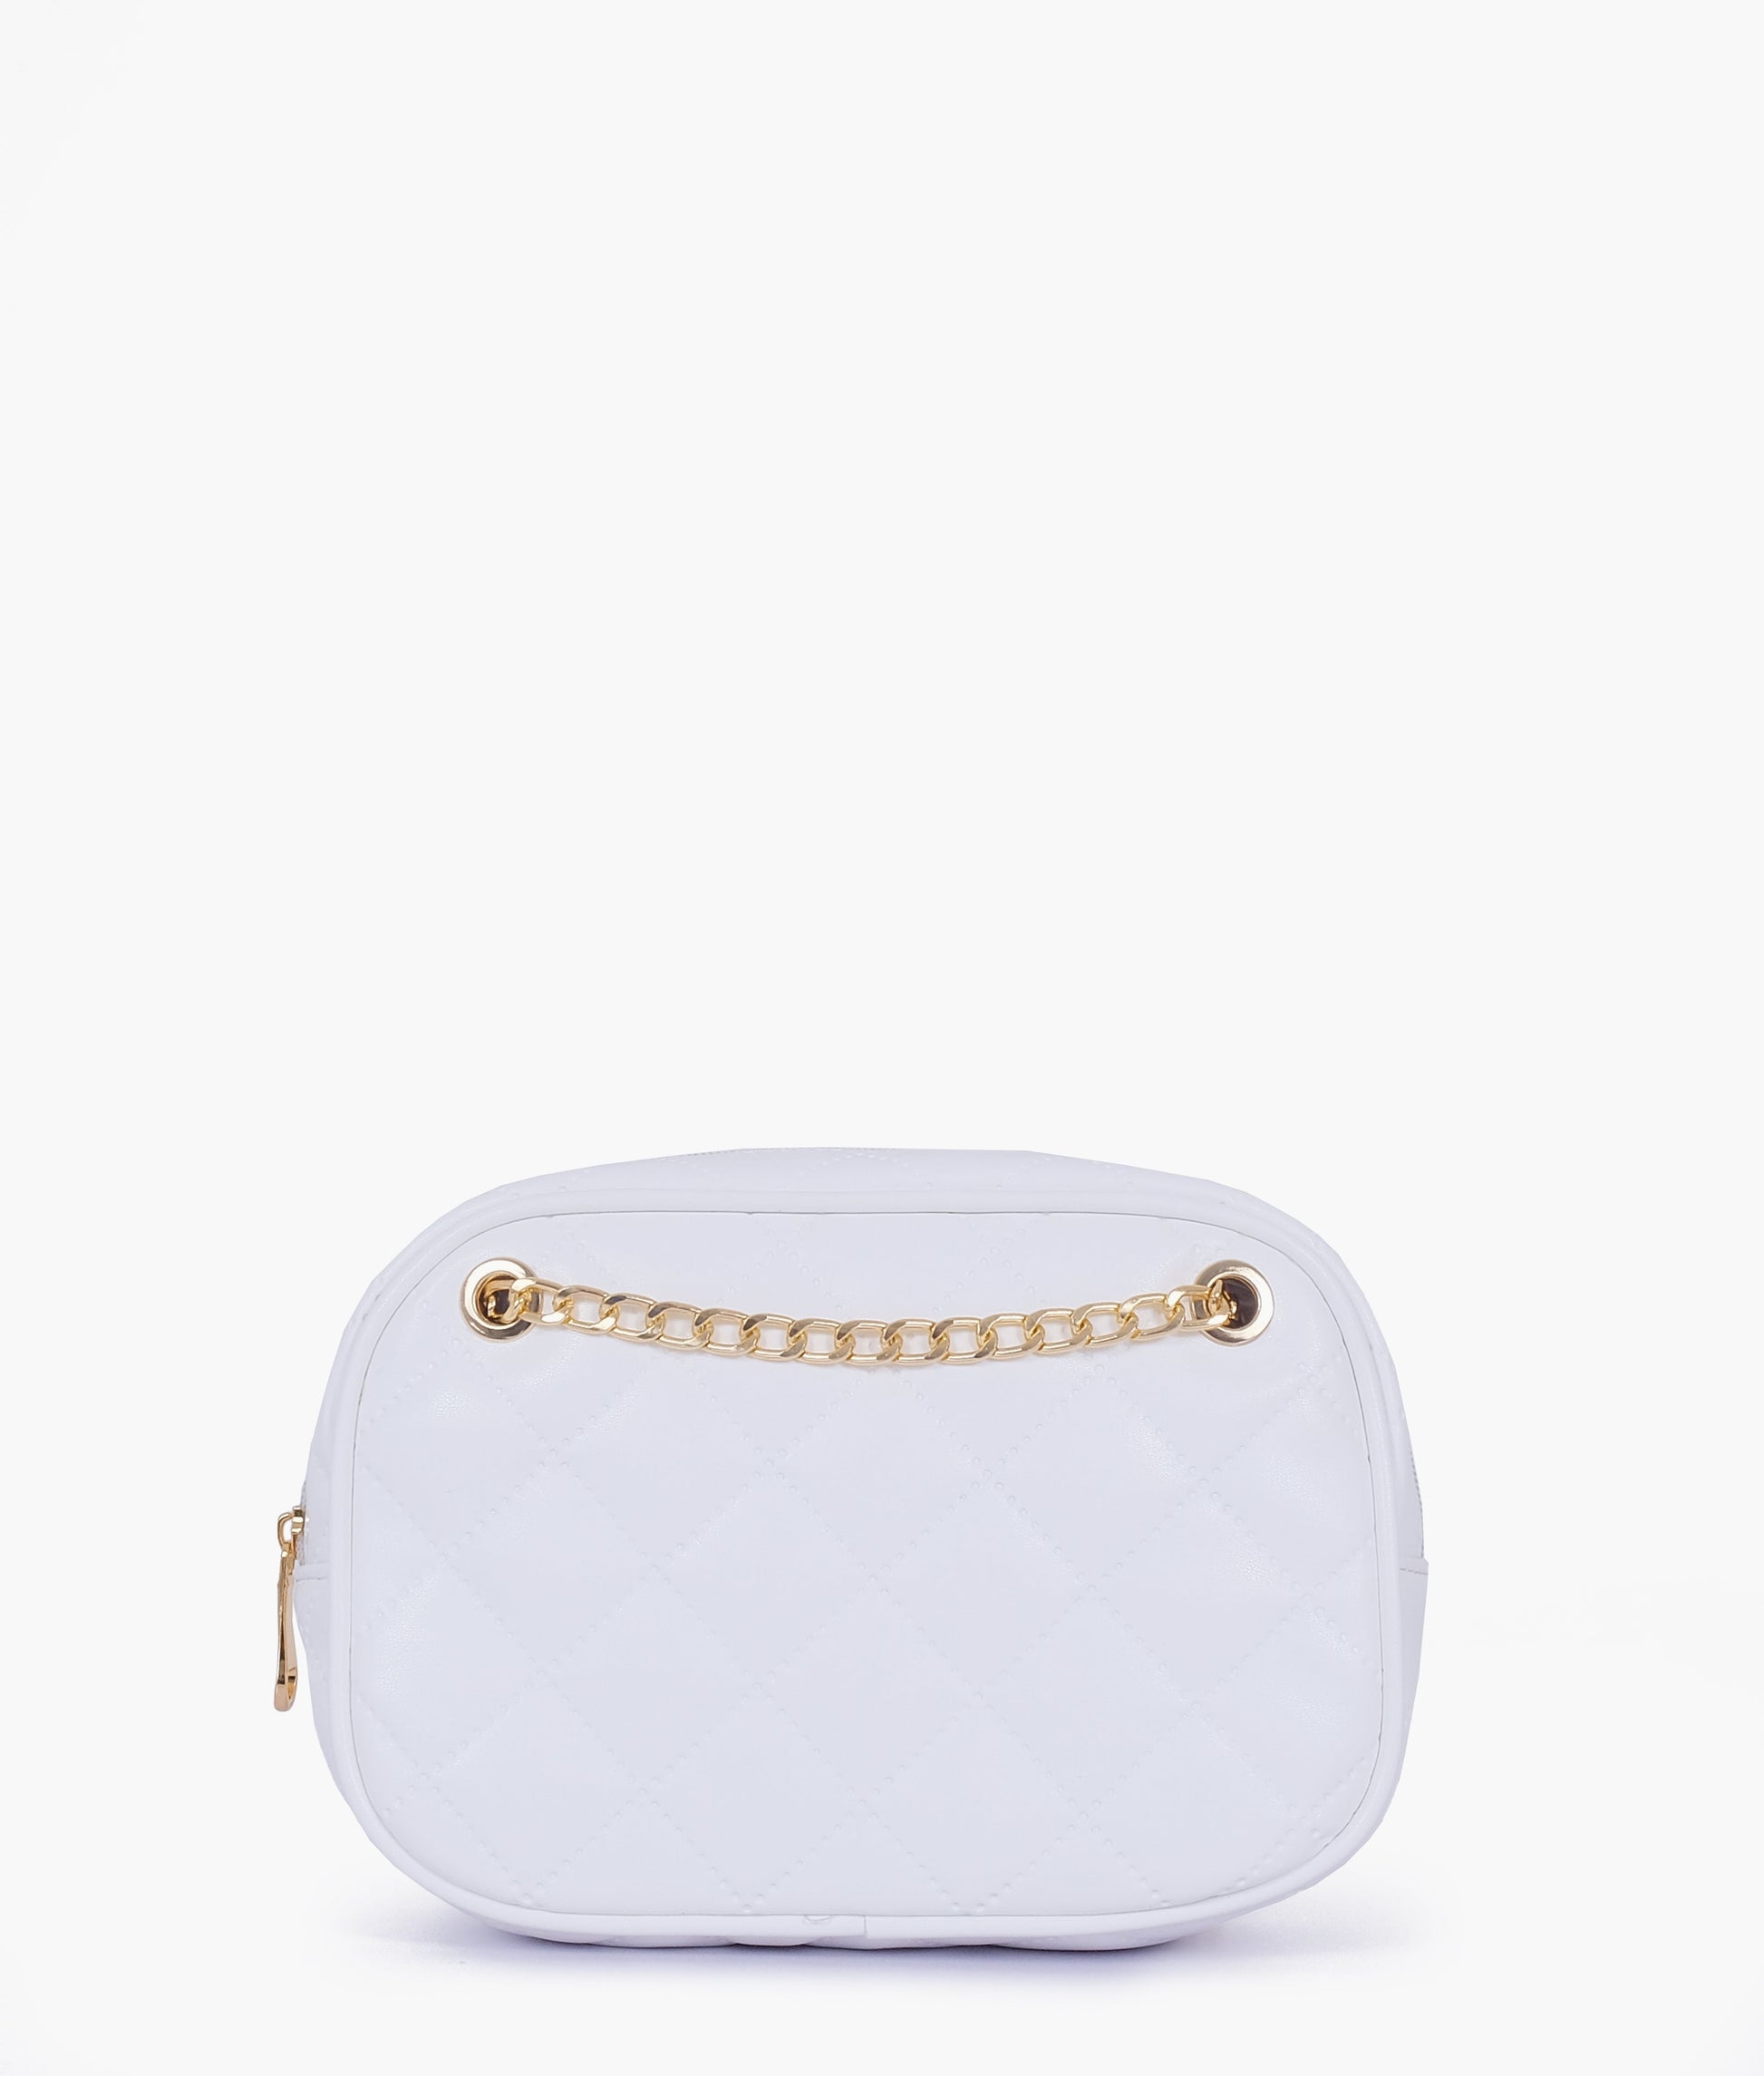 Buy White Quilted Rectangle Cross Body Bag - Old Lace in Pakistan